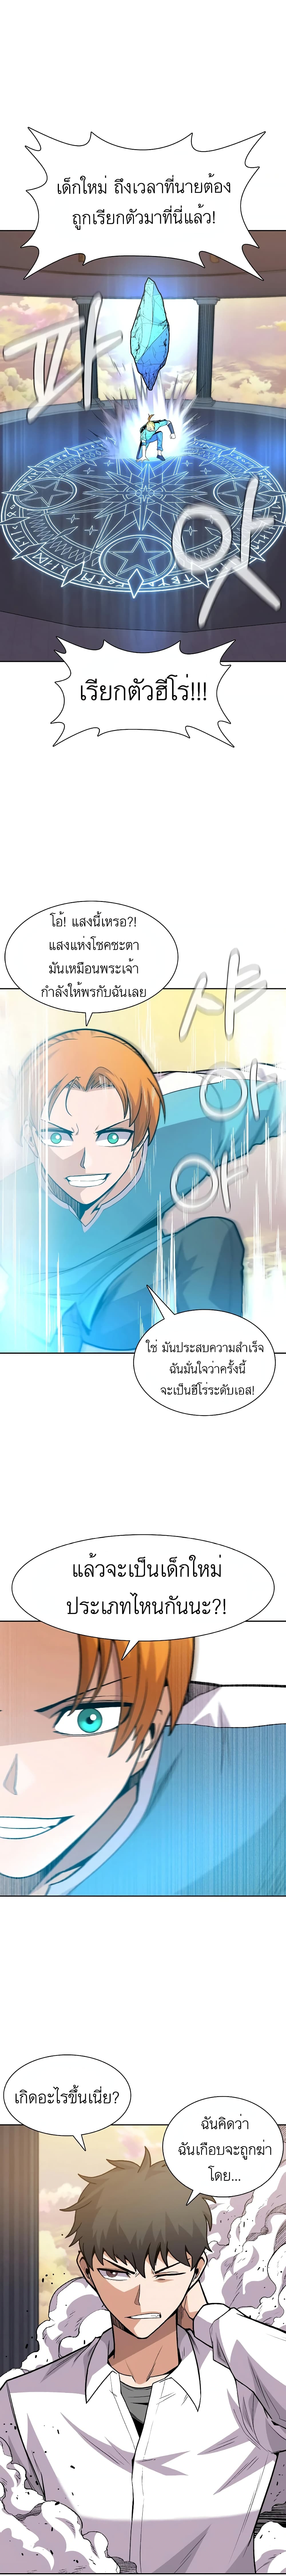 Raising Newbie Heroes In Another World ตอนที่ 2 (5)